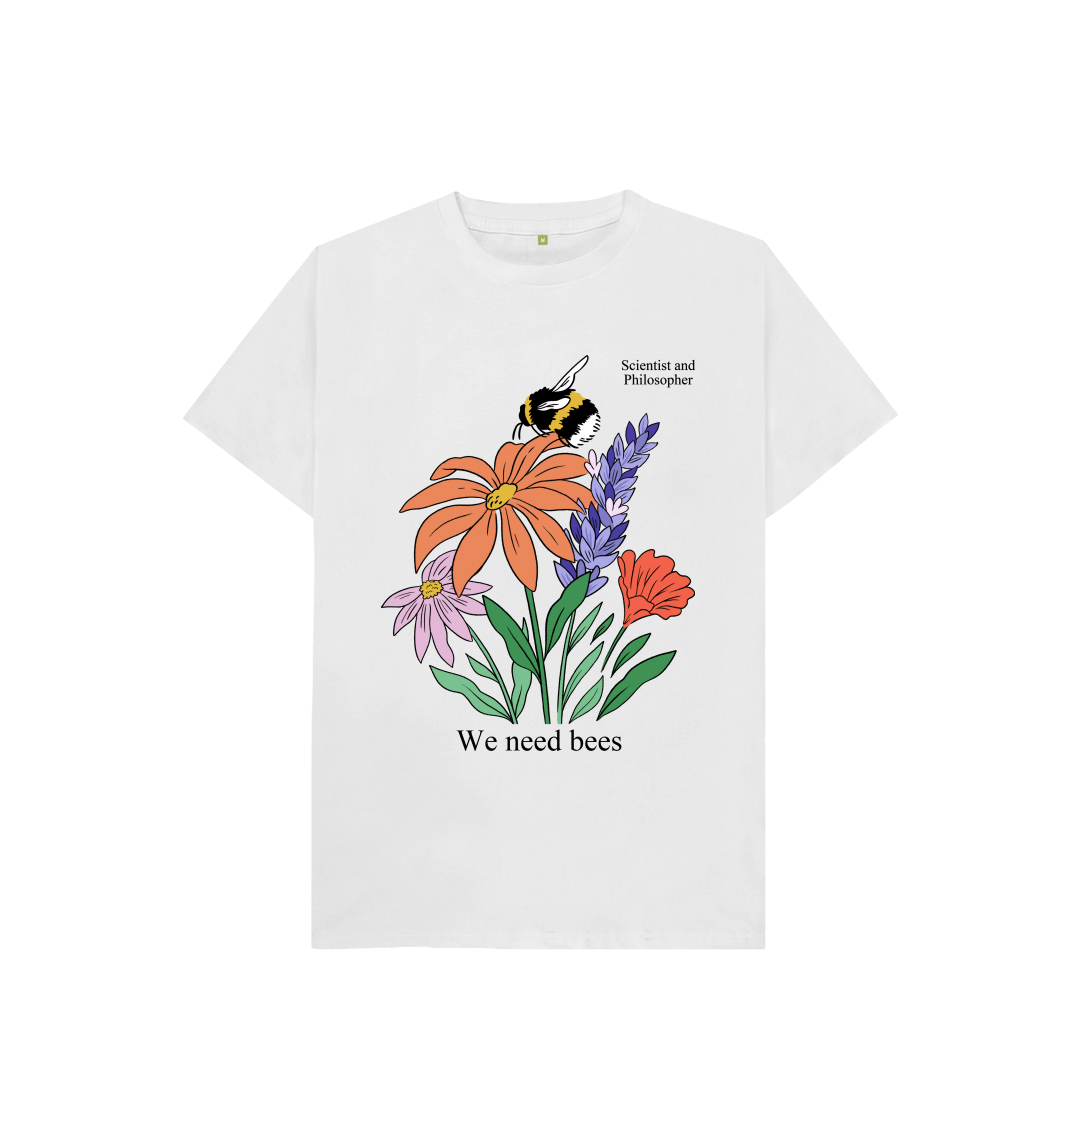 We need bees – Organic cotton T-shirt for children